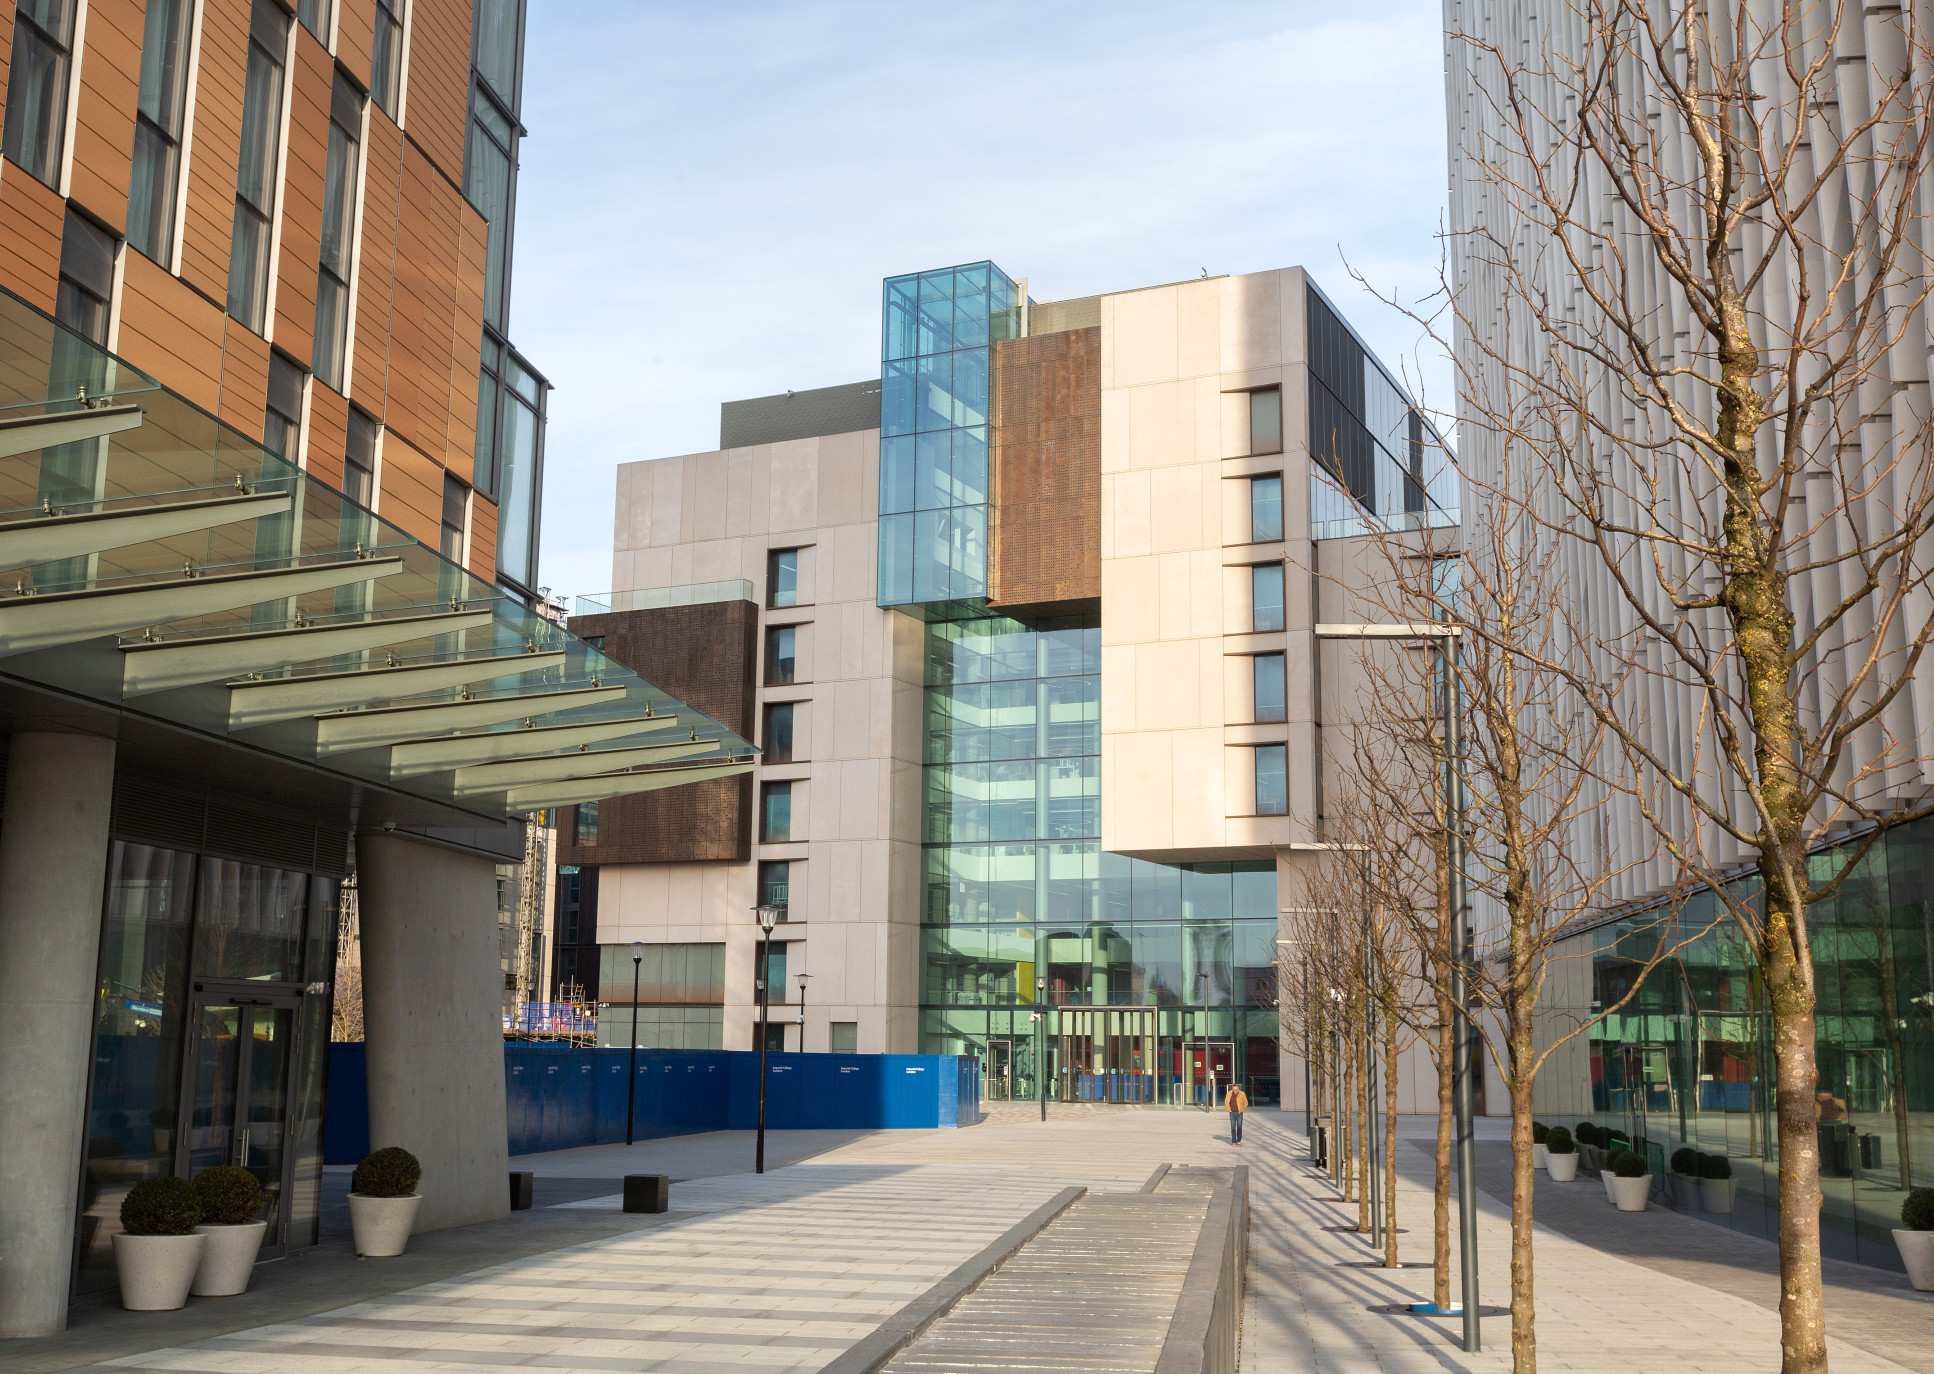 A view to the Molecular Sciences Research Hub at the White City Campus. Also visible is Eighty Eight Wood Lane, the residential tower (pictured on the left), and the Sir Michael Uren Hub (pictured on the right).